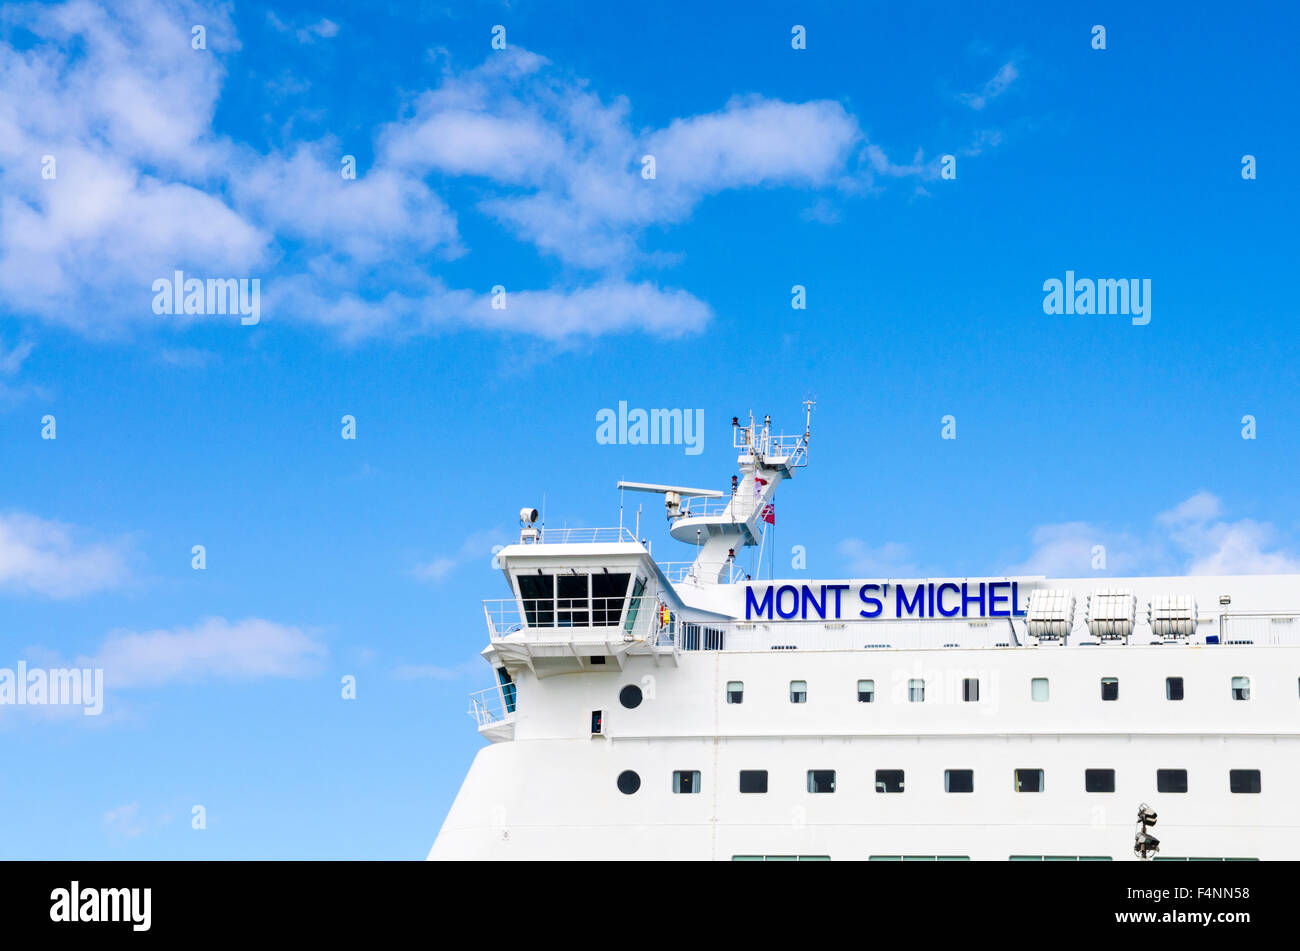 The upper decks and bridge of Brittany Ferries Mont St Michel Ferry. Stock Photo